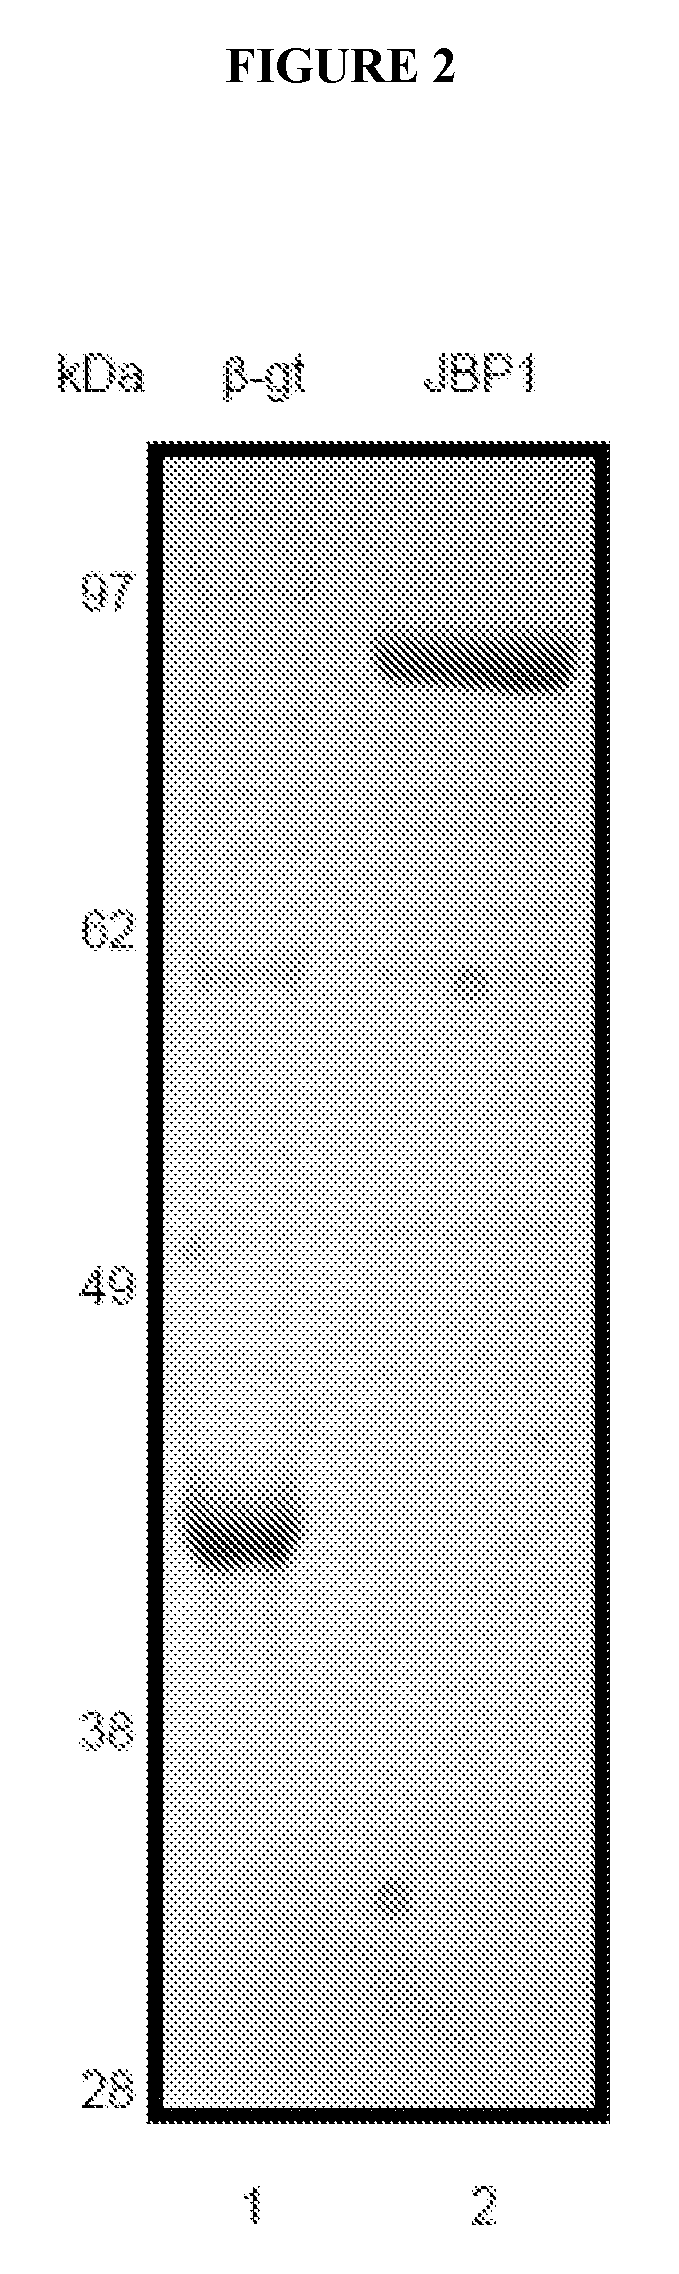 Methods and kits for detection of 5-hydroxymethylcytosine